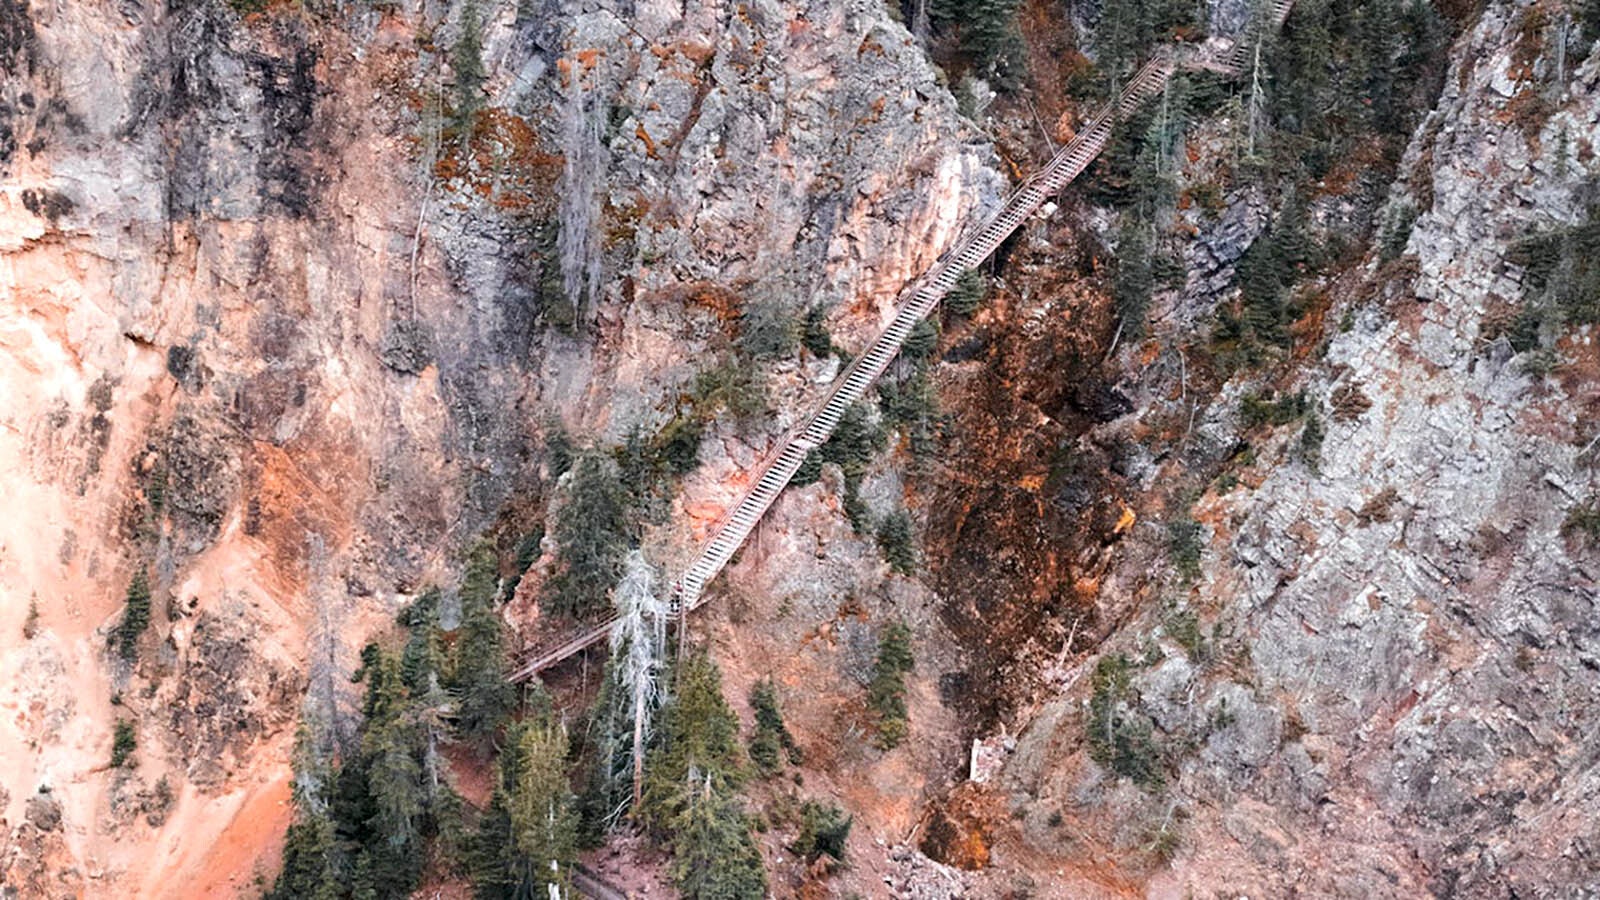 Uncle Tom's Trail hangs precariously off the cliff face descending into the Grand Canyon of the Yellowstone. It's now unsafe and closed, but still turns heads.